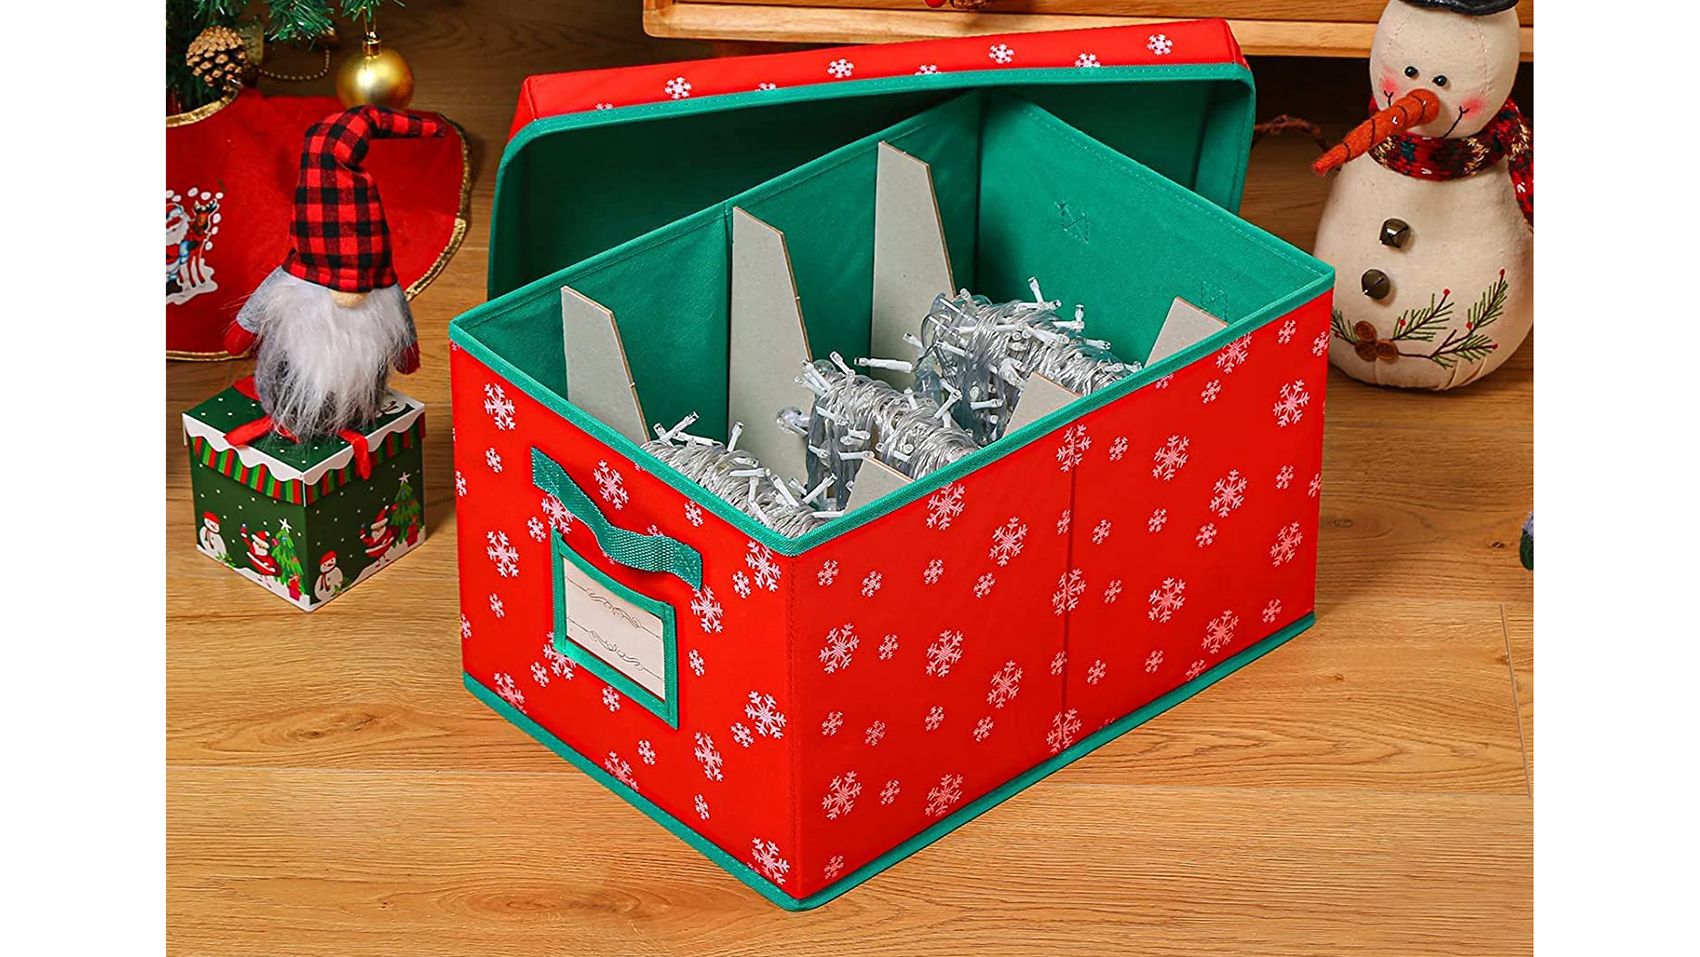 Here are 26 tips and everything you need to store your holiday